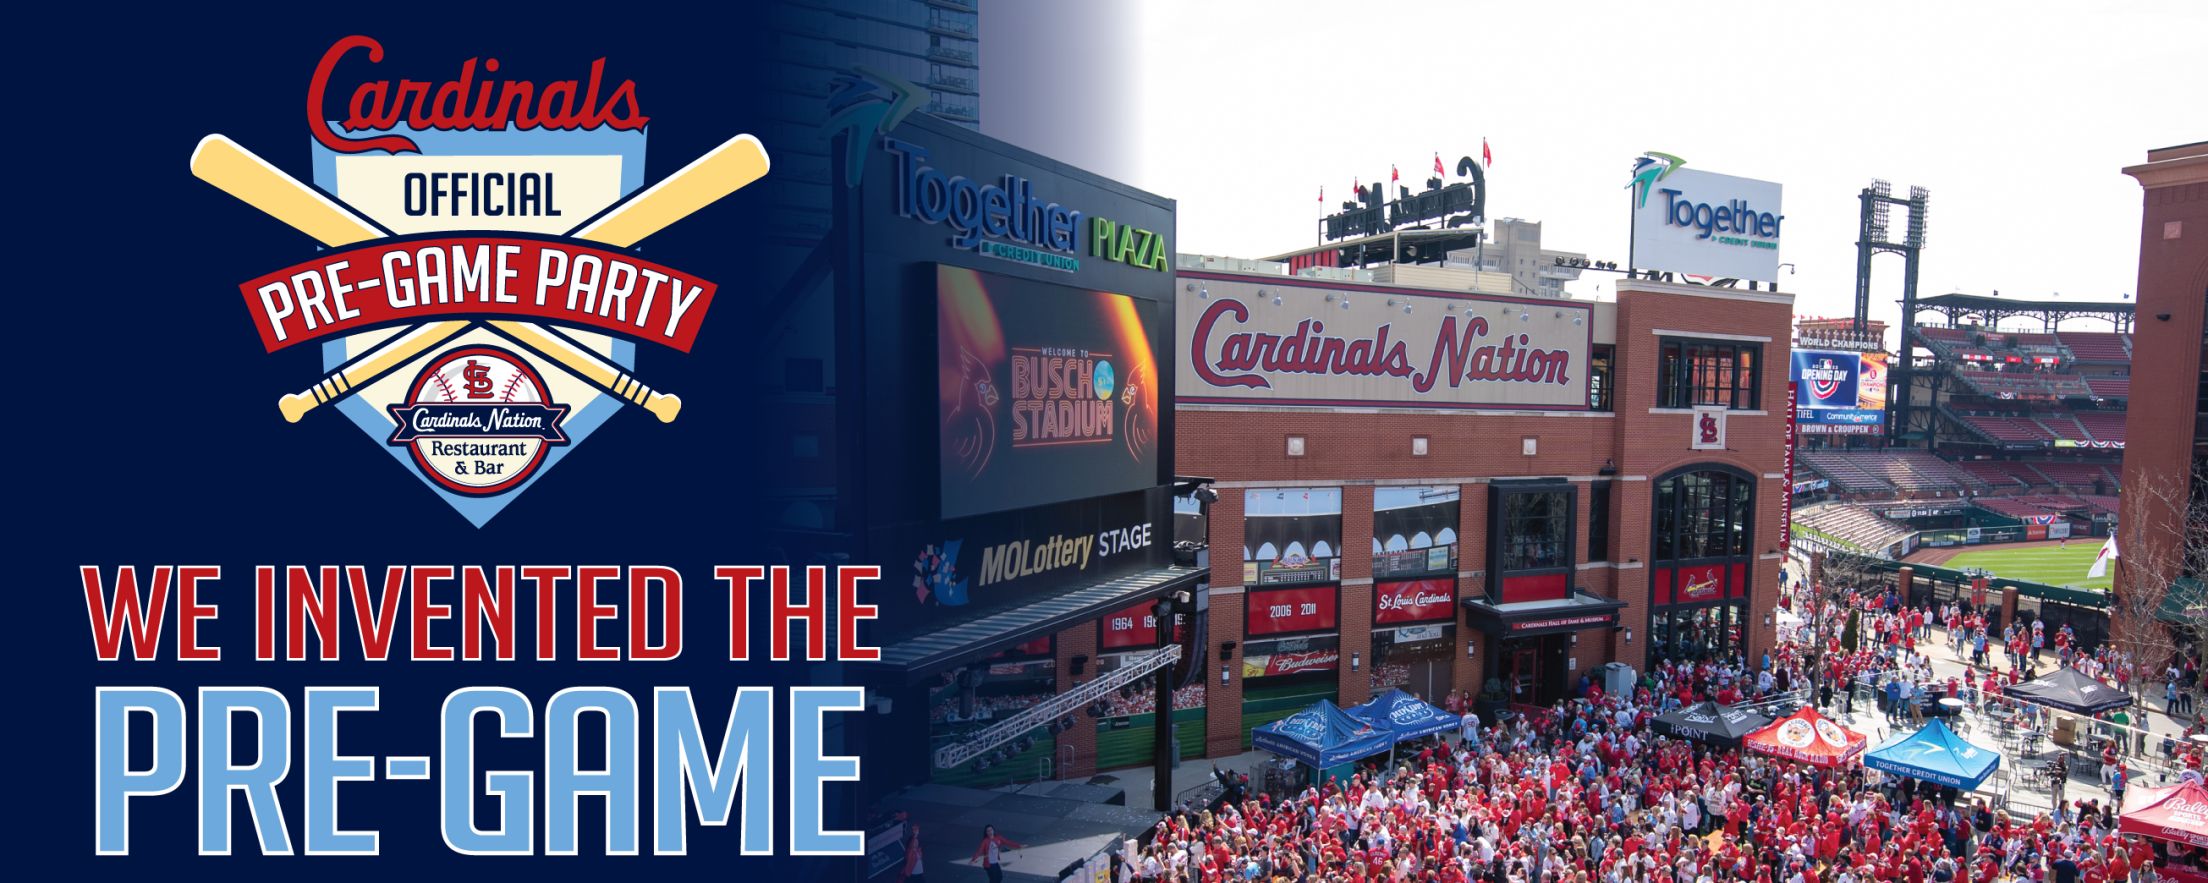 FREE St. Louis Cardinals Opening Day Watch Party on Thursday, March 30!